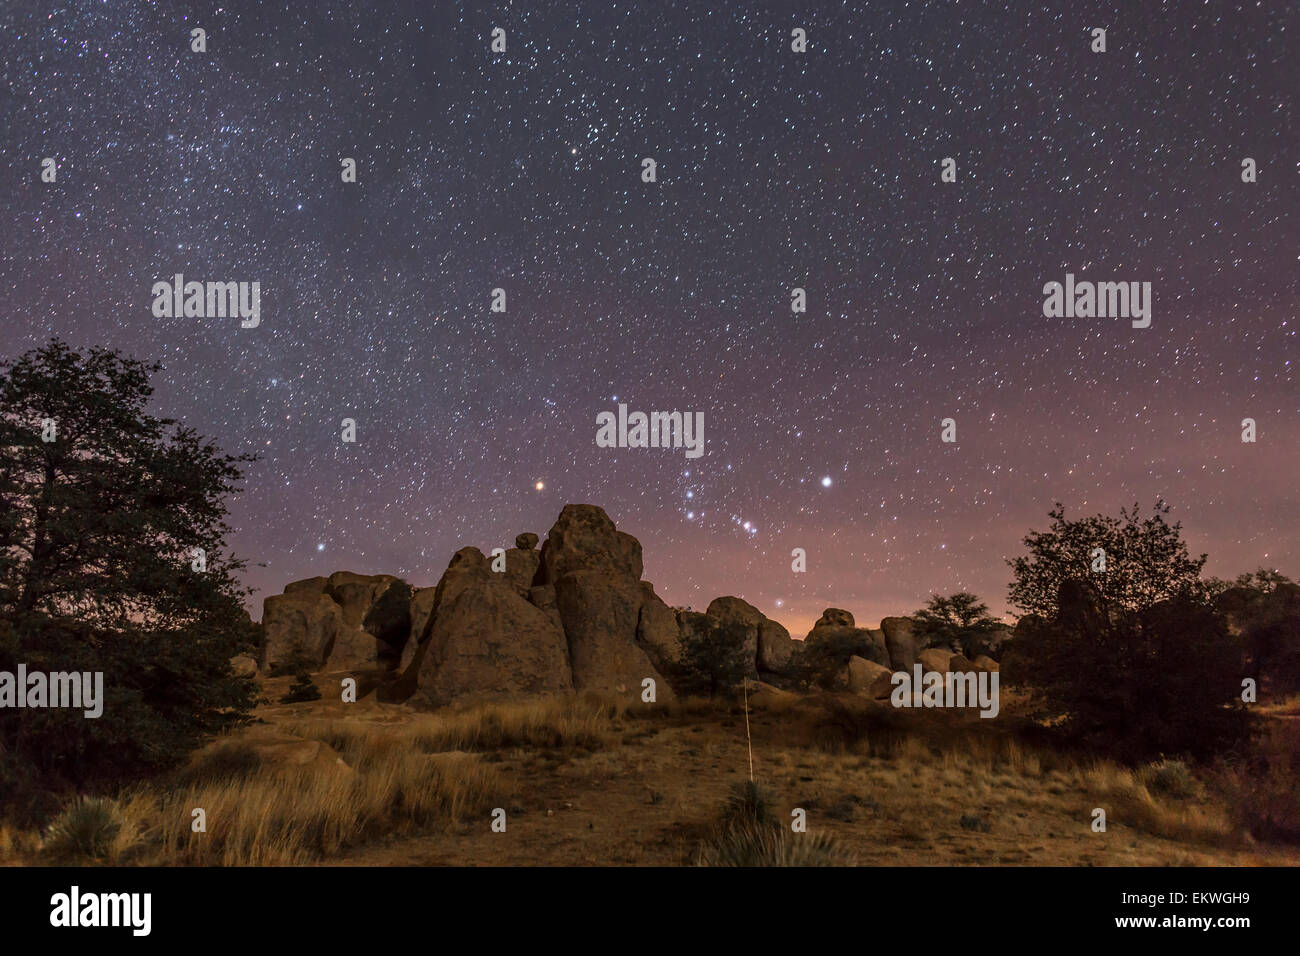 Starry, Starry Nights — Hidden New Mexico